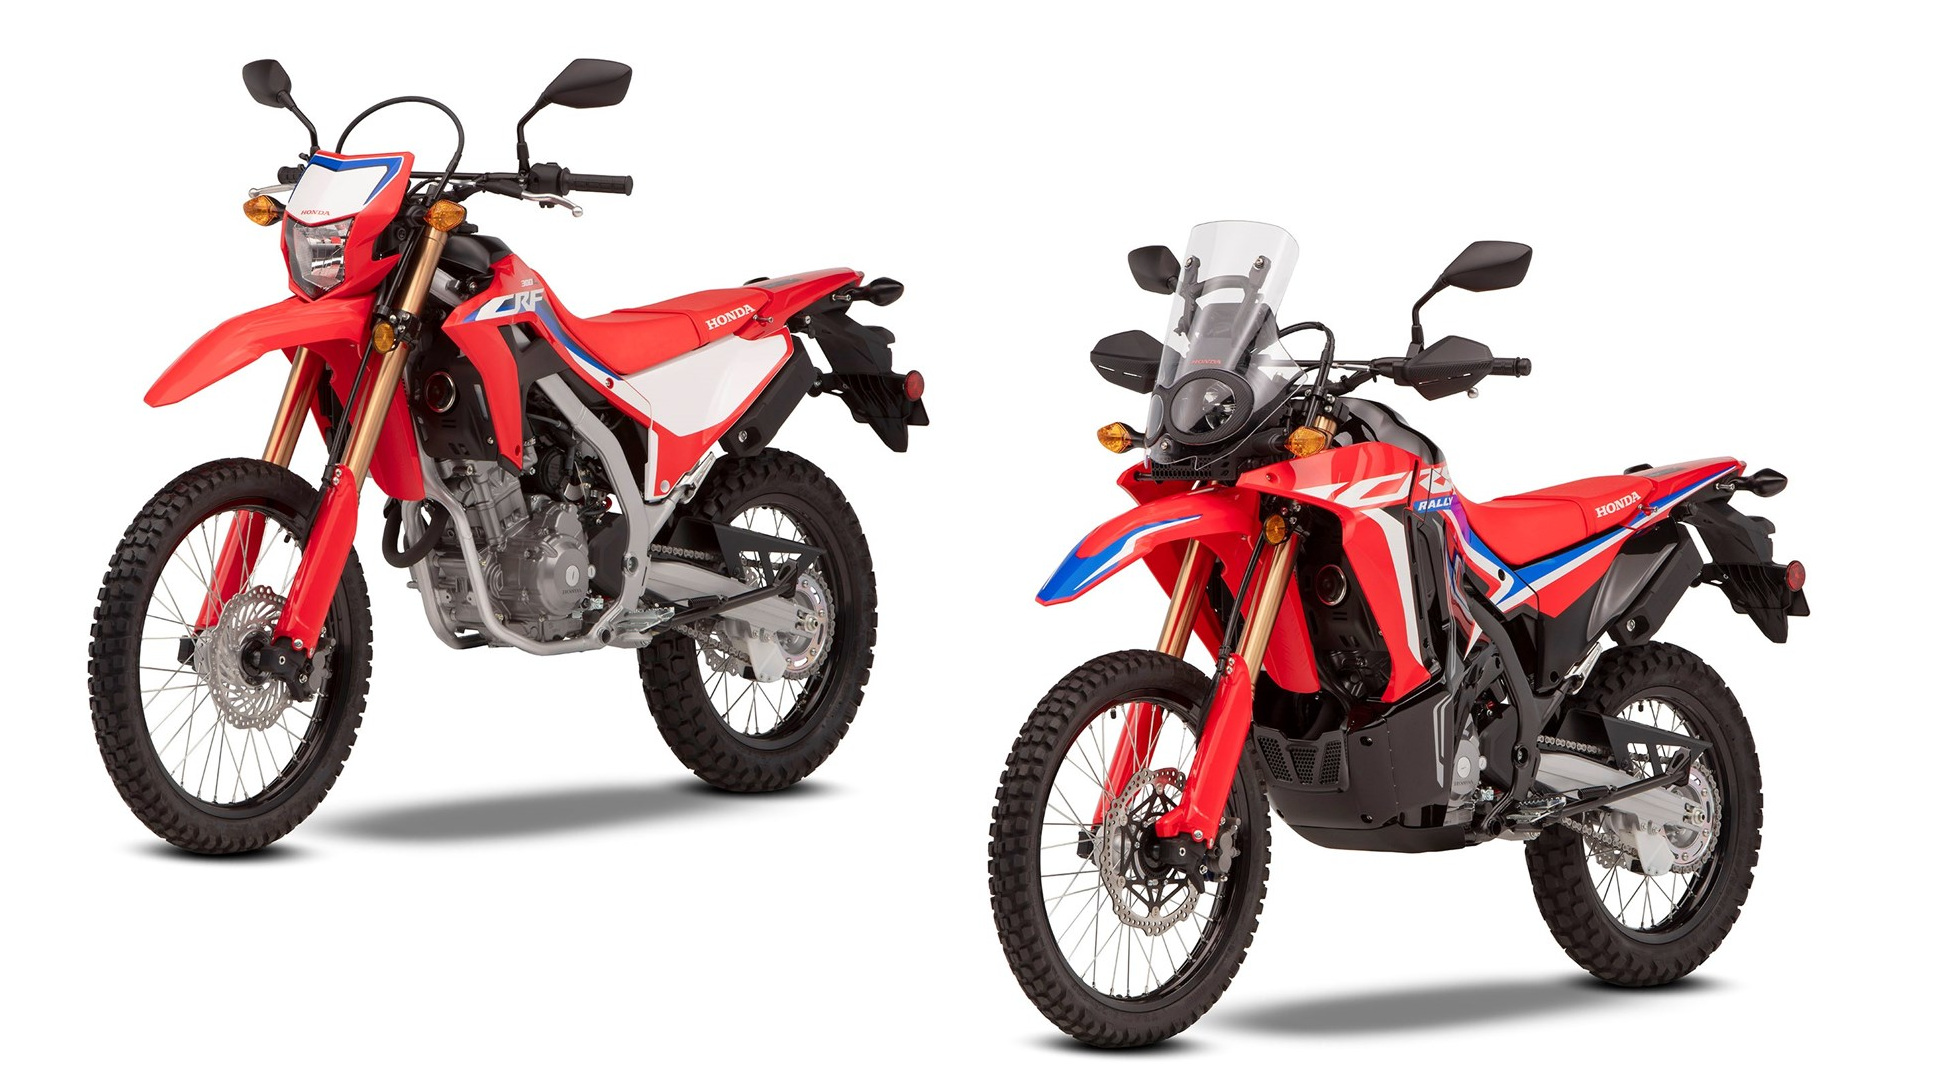 2021 Honda Crf300L, Crf300 Rally: Specs, Prices, Features, Launch